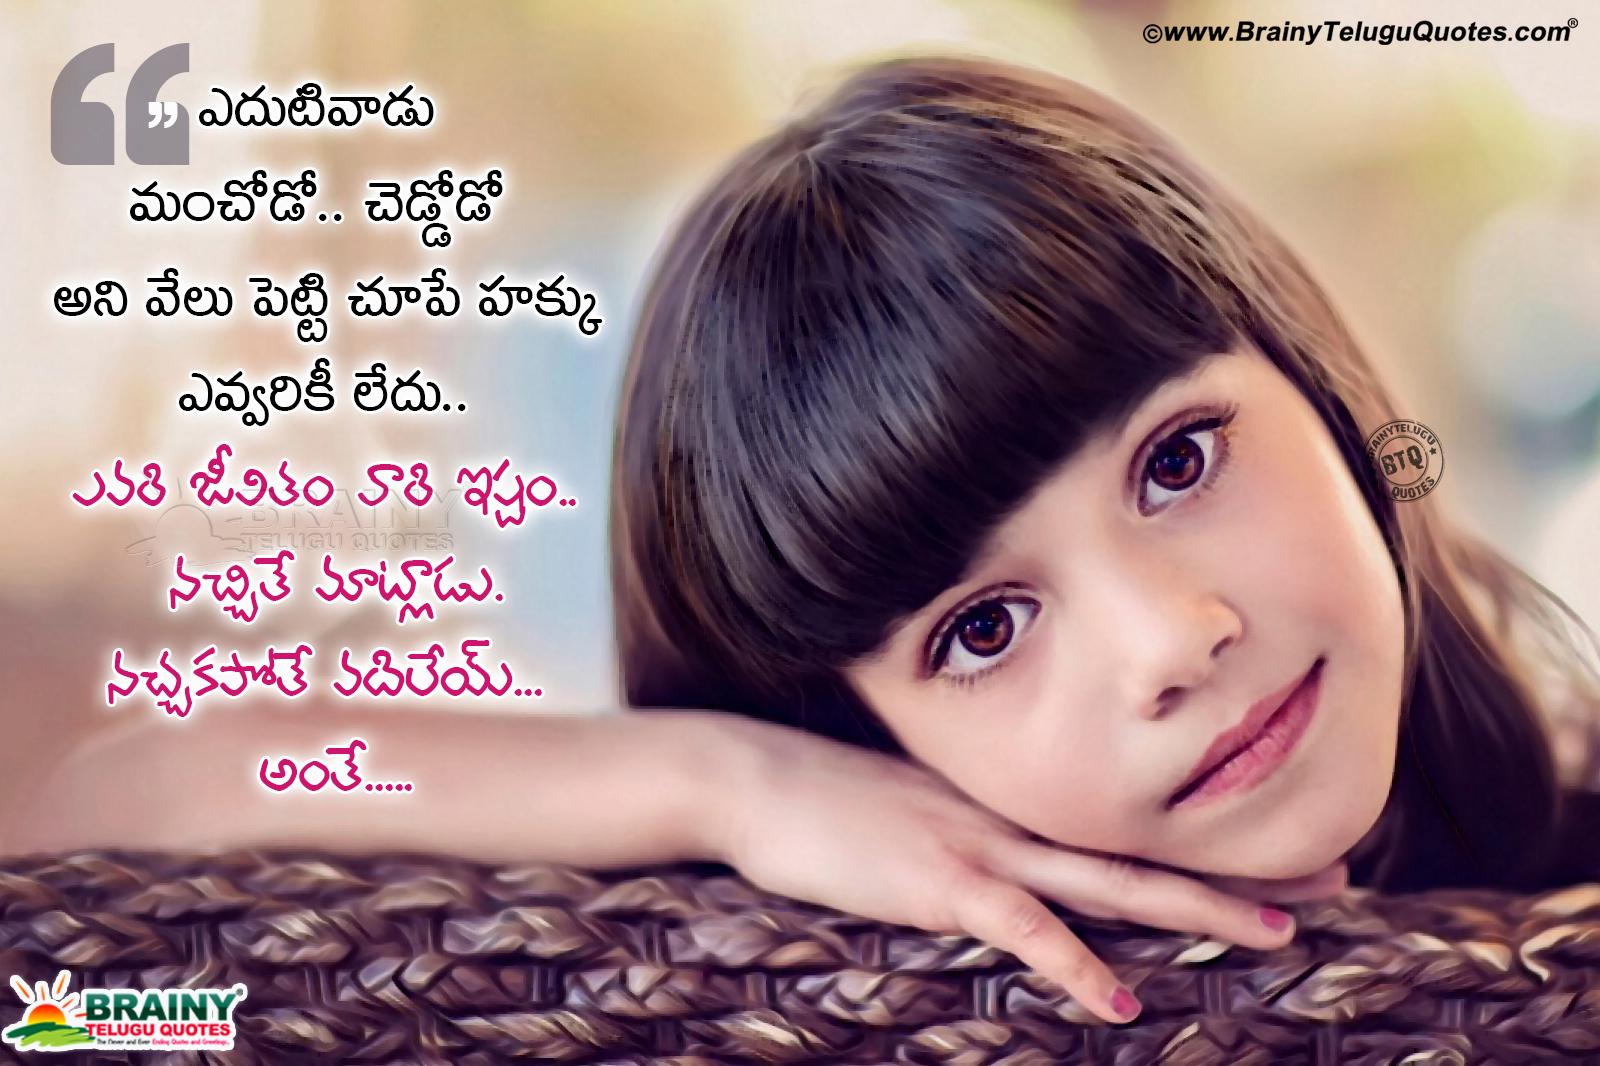 Famous Telugu Most Inspirational Quotes  about being Human 